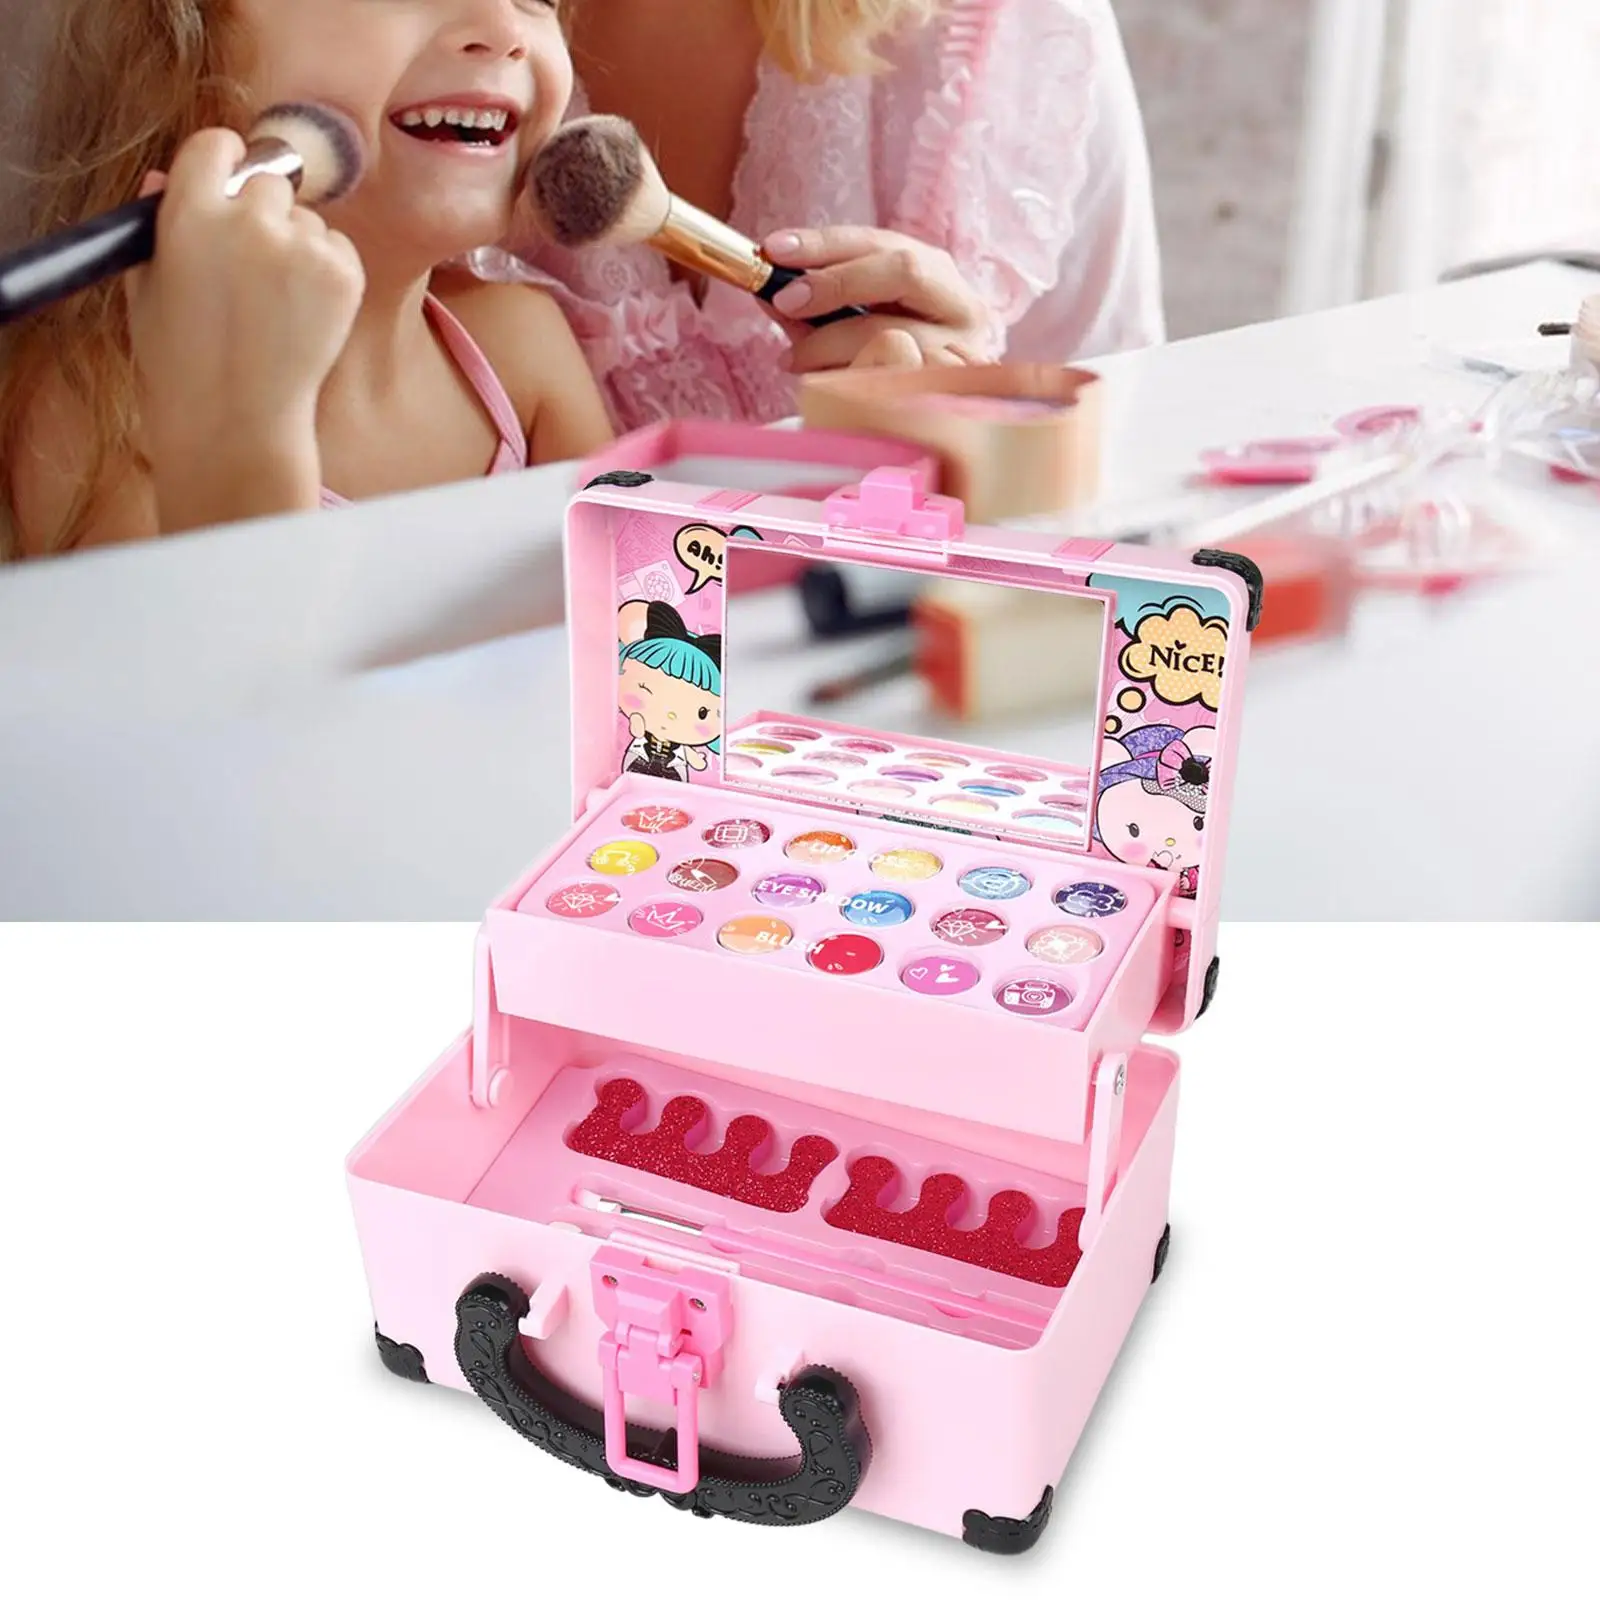 Children Makeup Playing Box Pretend Cosmetic Makeup Accessories Vanity Set Girls Toy Pretend Makeup Set for Kids Toddlers Girls